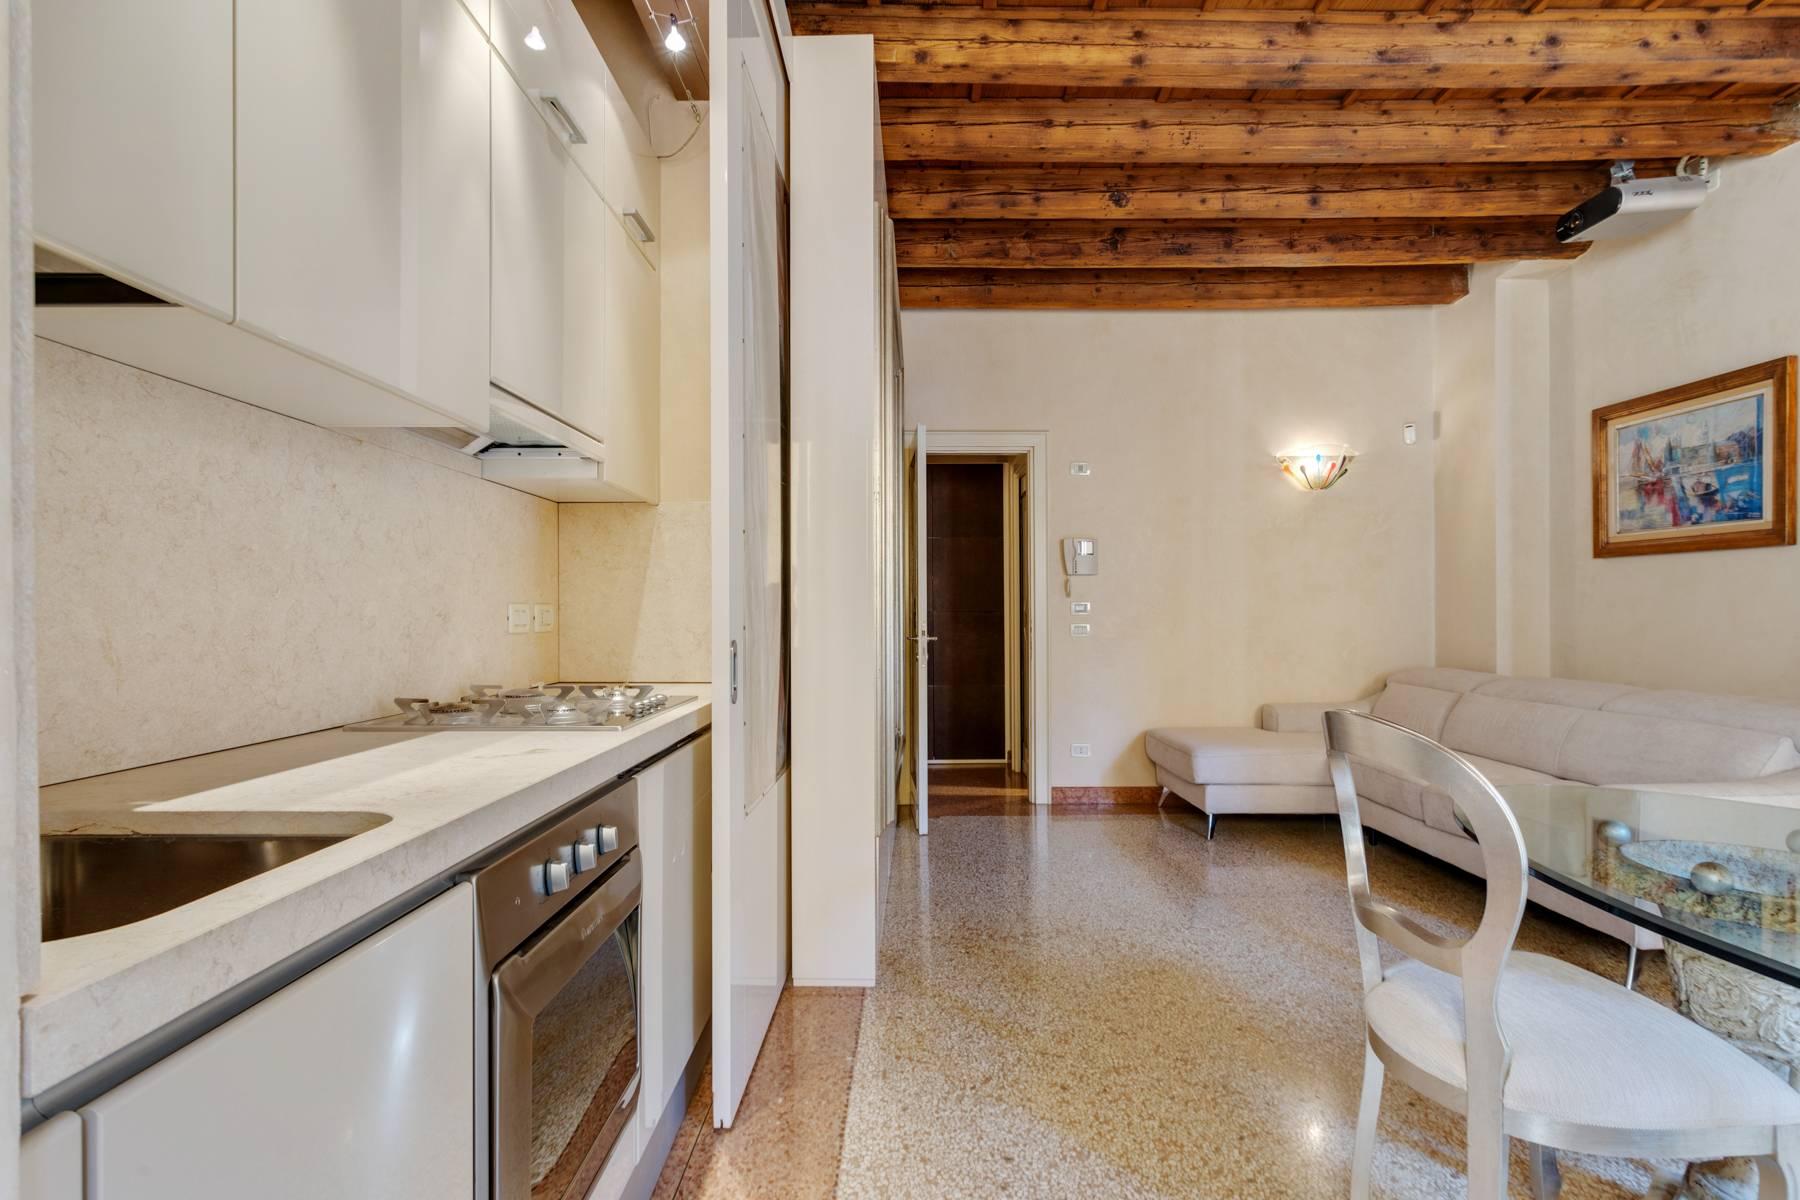 Exquisite apartment just few steps away from Piazza delle Erbe - 7